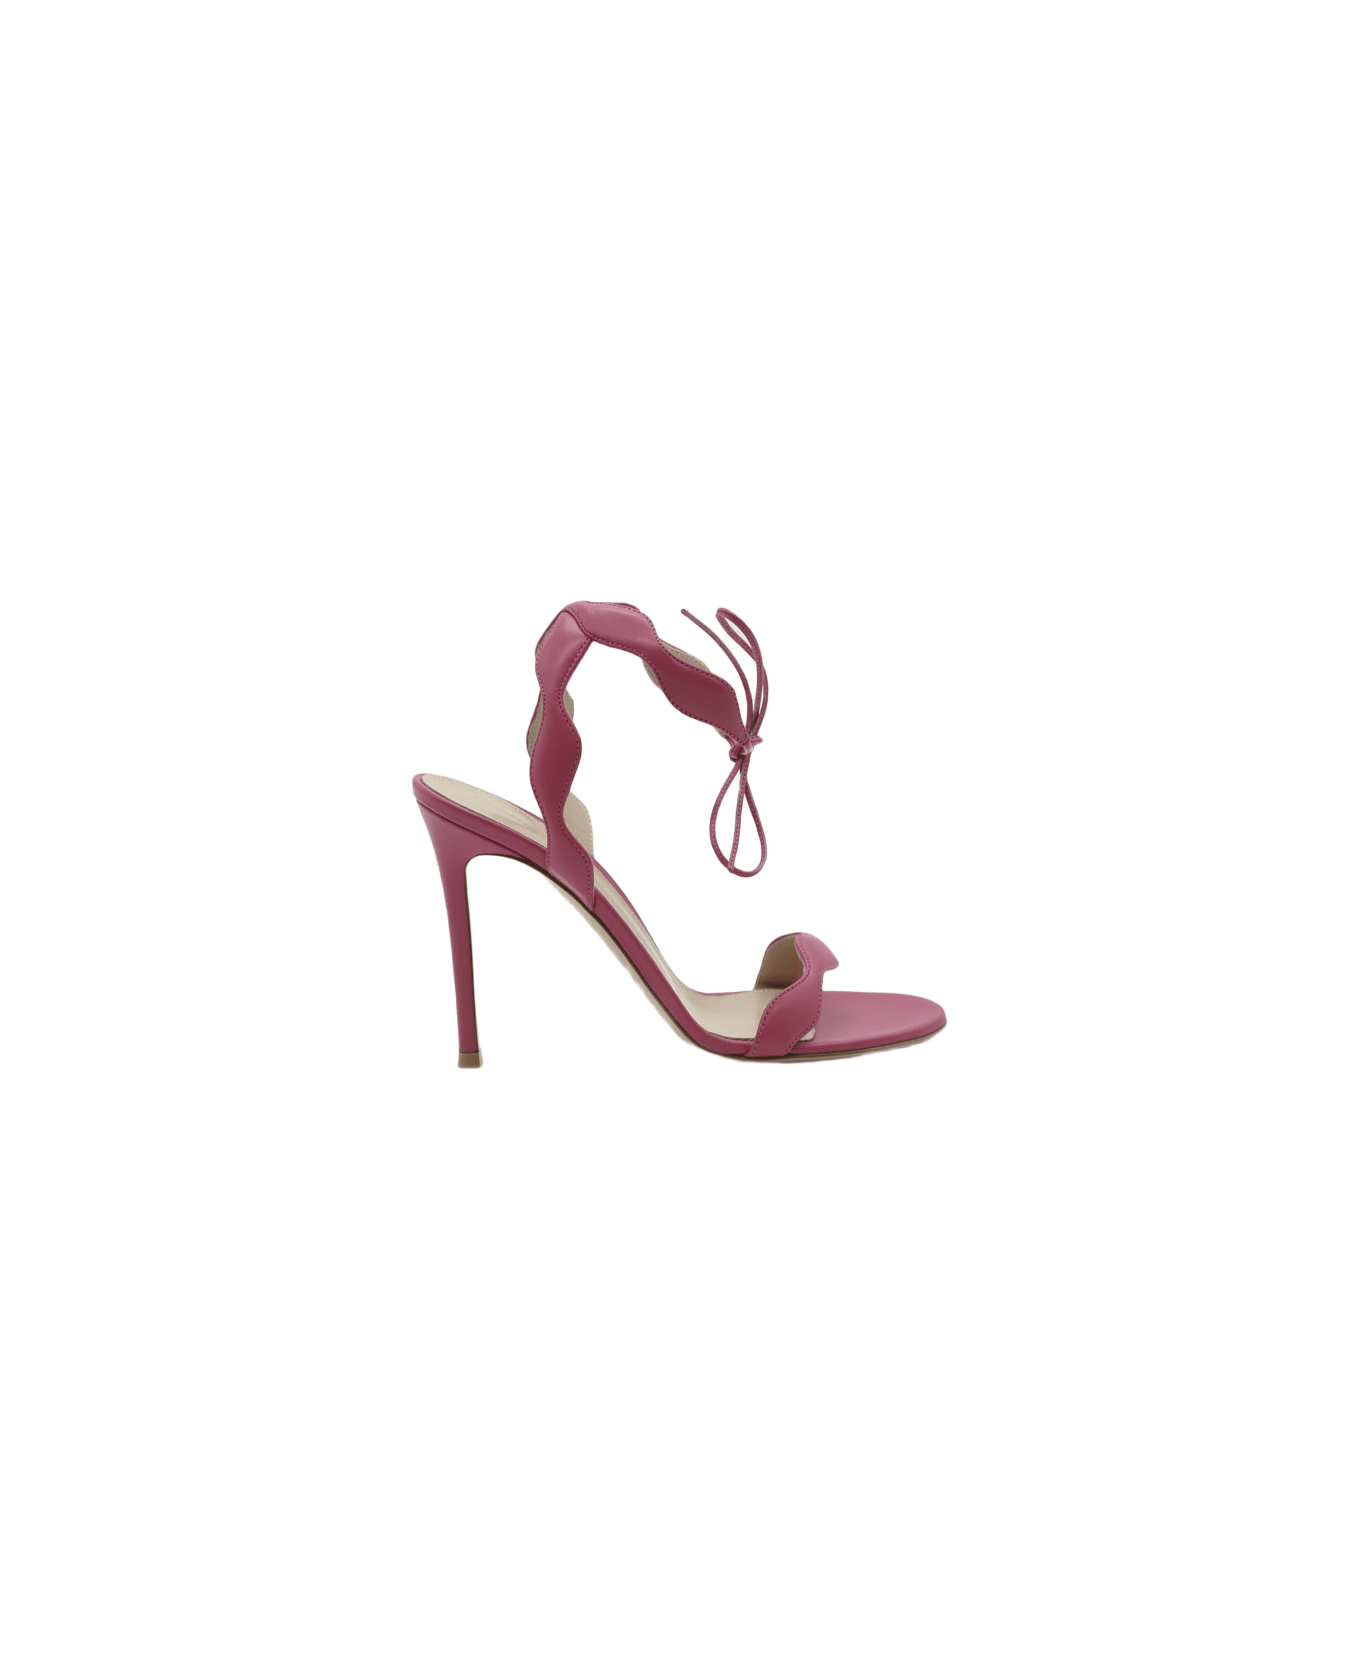 Gianvito Rossi Sandals Made Of Leather - Ruby rose